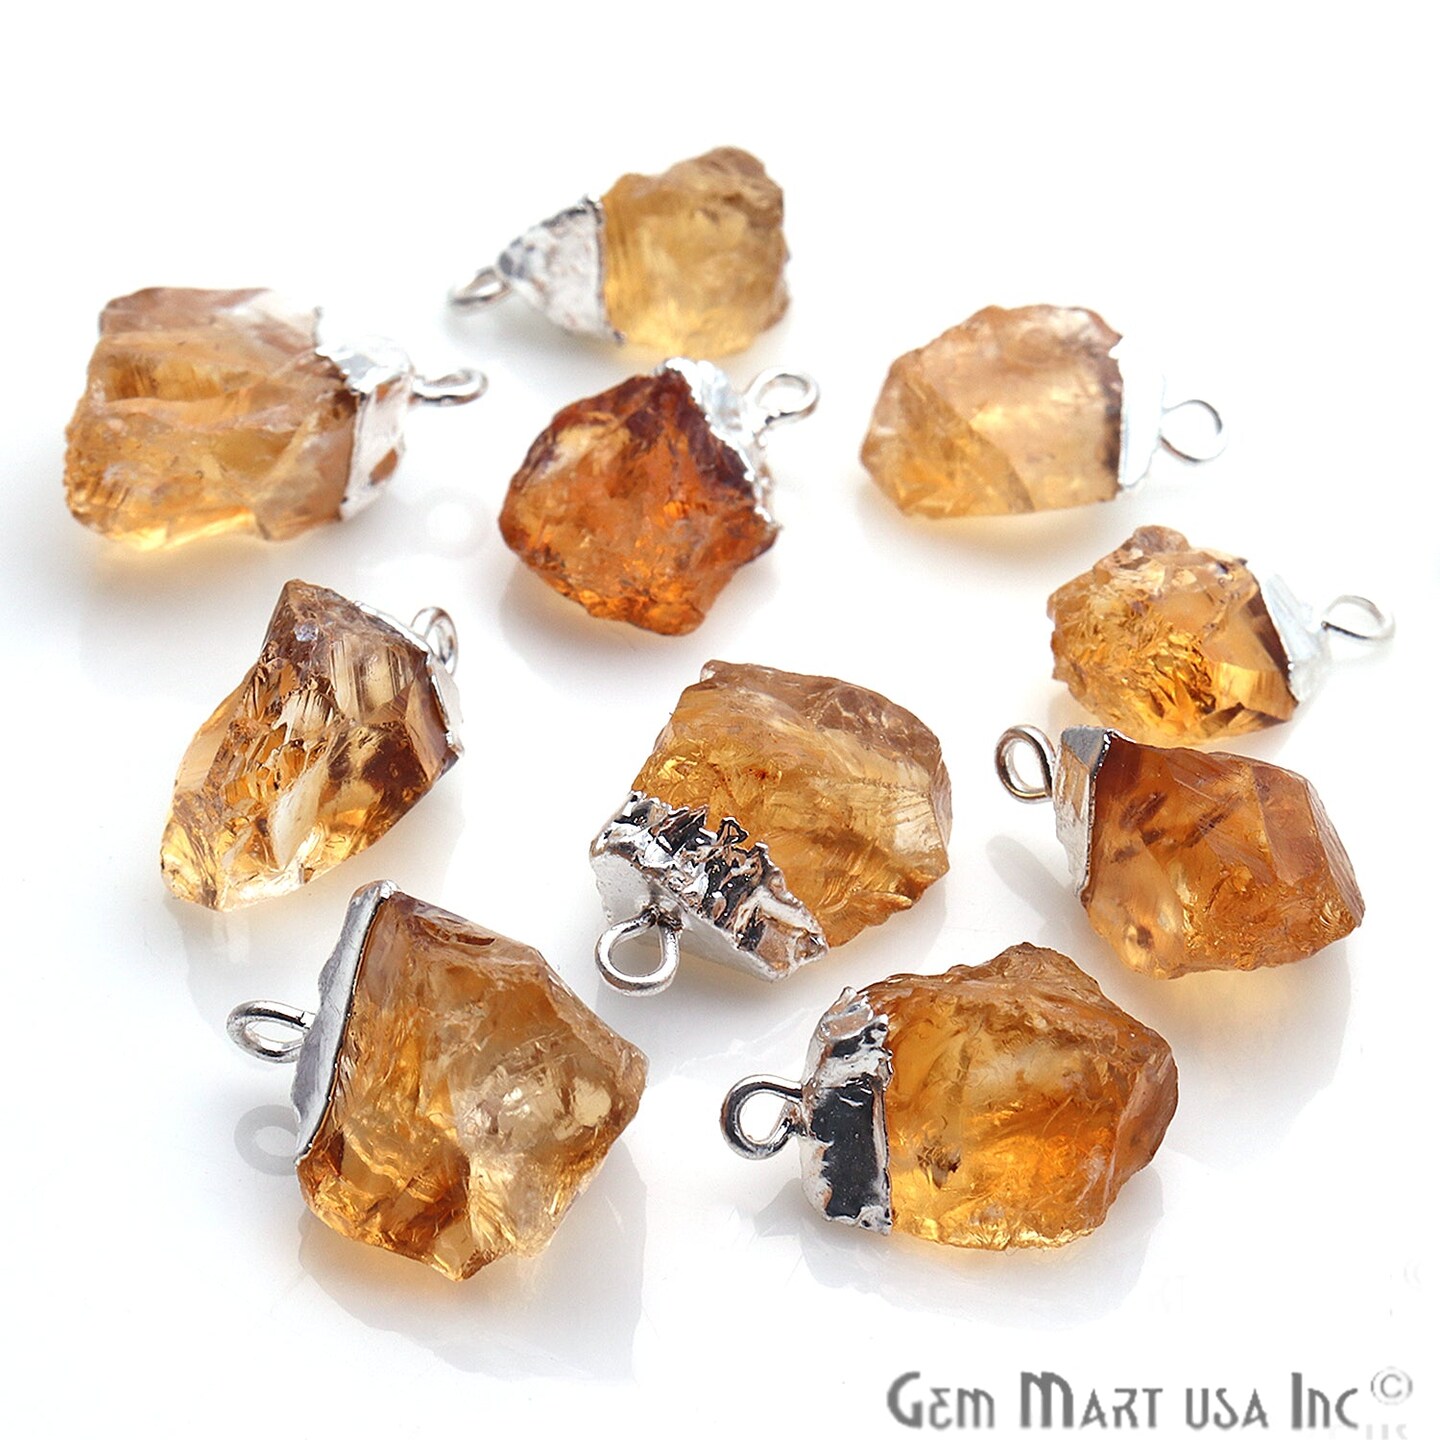 Rough Gemstone Pendant, Birthstone Raw Pendant, Silver Electroplated Connector Charms, 15x10mm (Approx), 1 pc, GemMartUSA (50470)